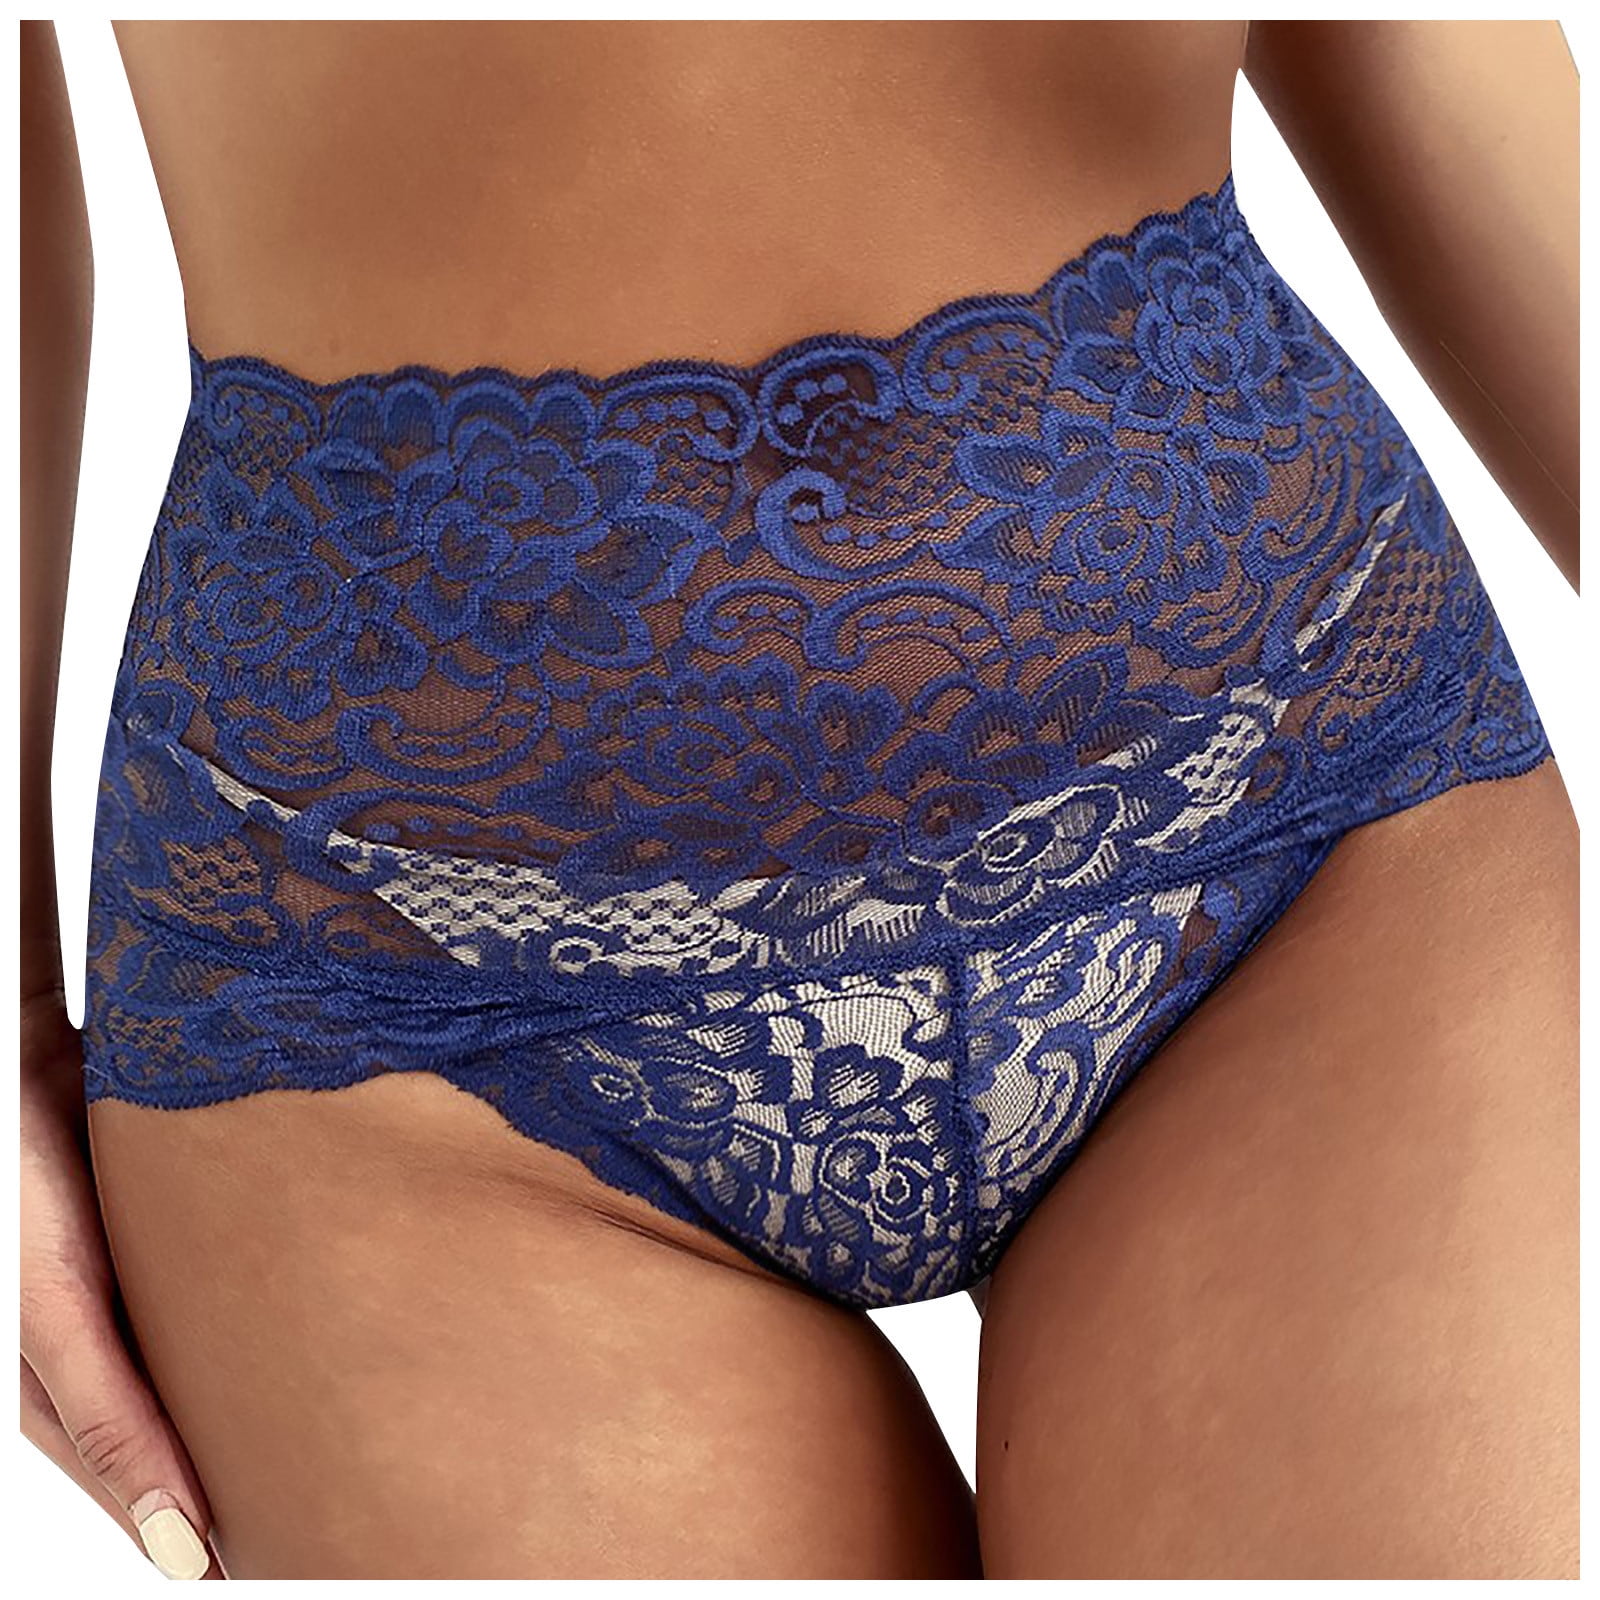 Mrat Seamless Panties Women Seamless Panty Soft Ladies Transparent Lace  Splicing Panties Cotton Hollow Breathable Quality Cotton Stretch Briefs